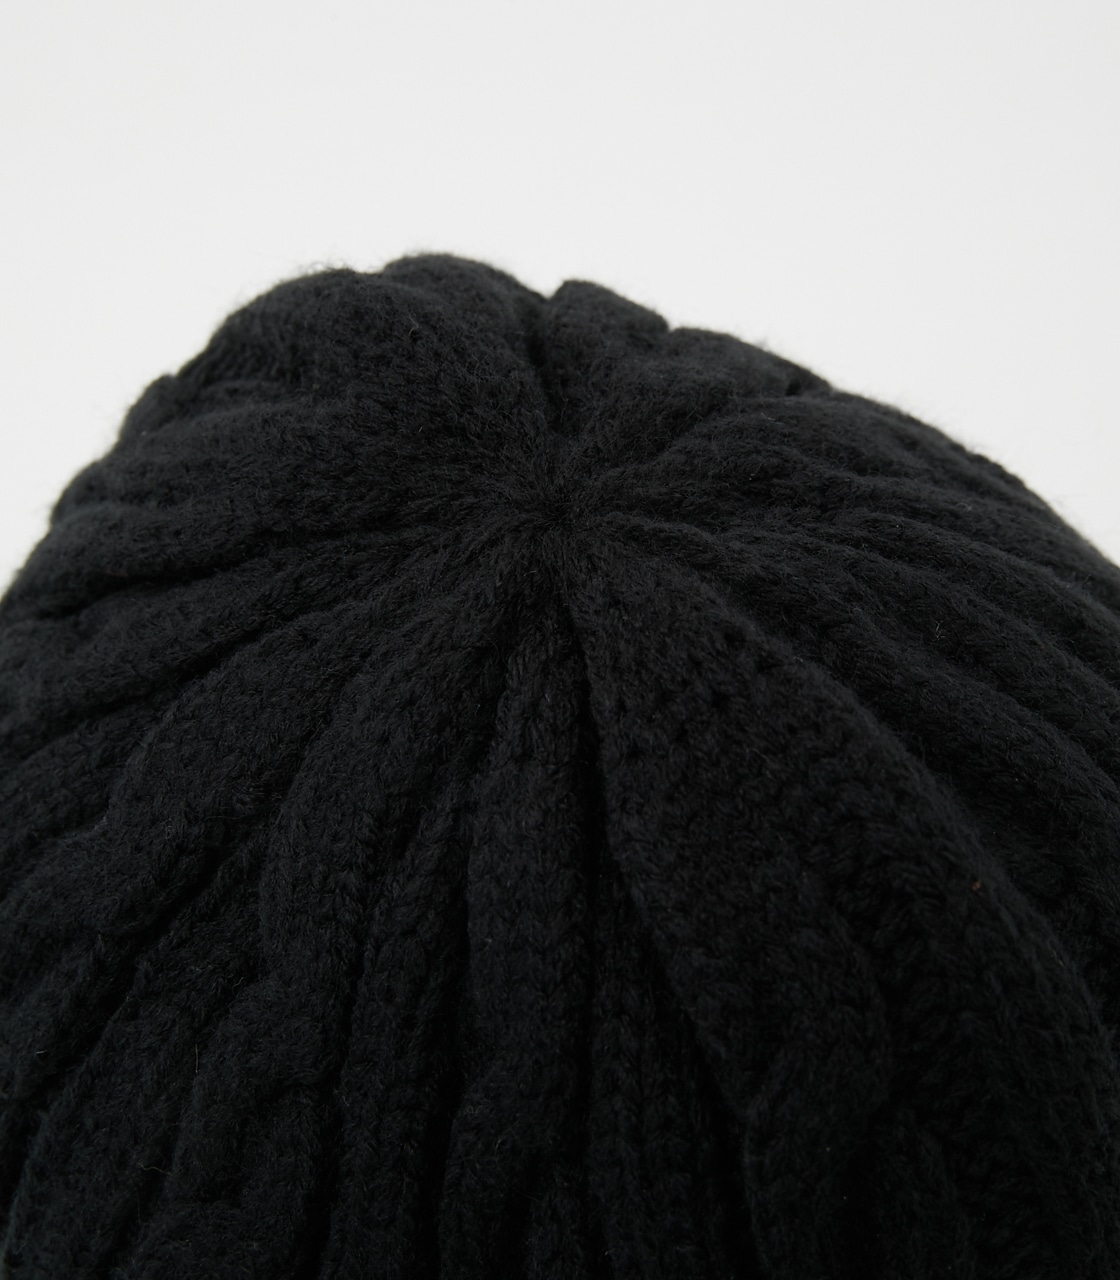 CABLE KNIT CAP/ケーブルニットキャップ 詳細画像 BLK 5